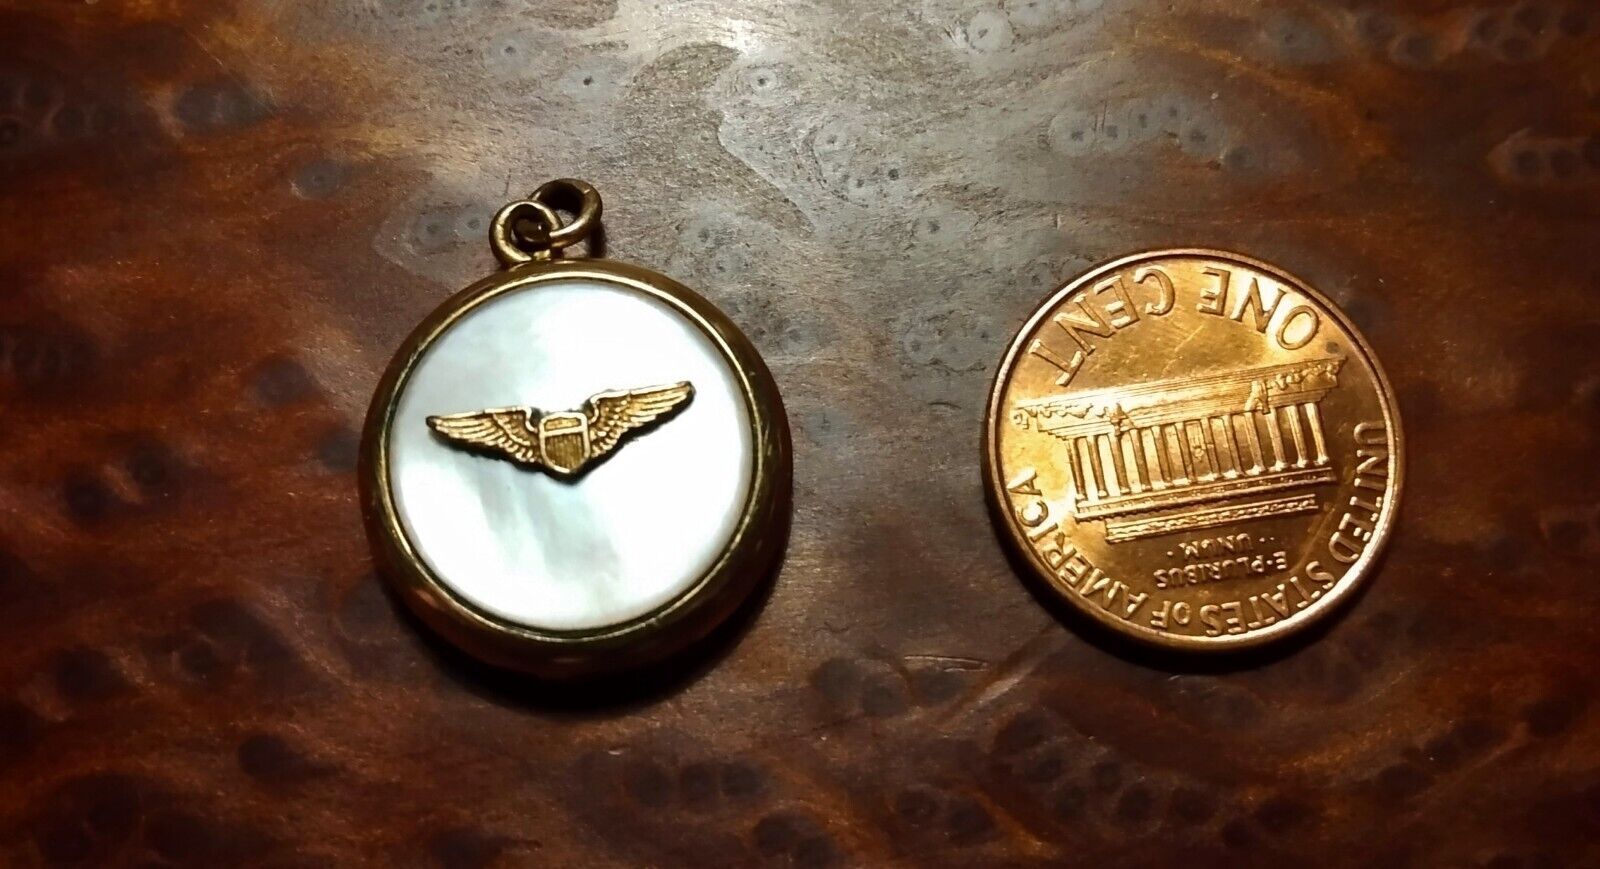 Vintage WWII US Army Air Force Gold Filled Locket Pendant La Mode.